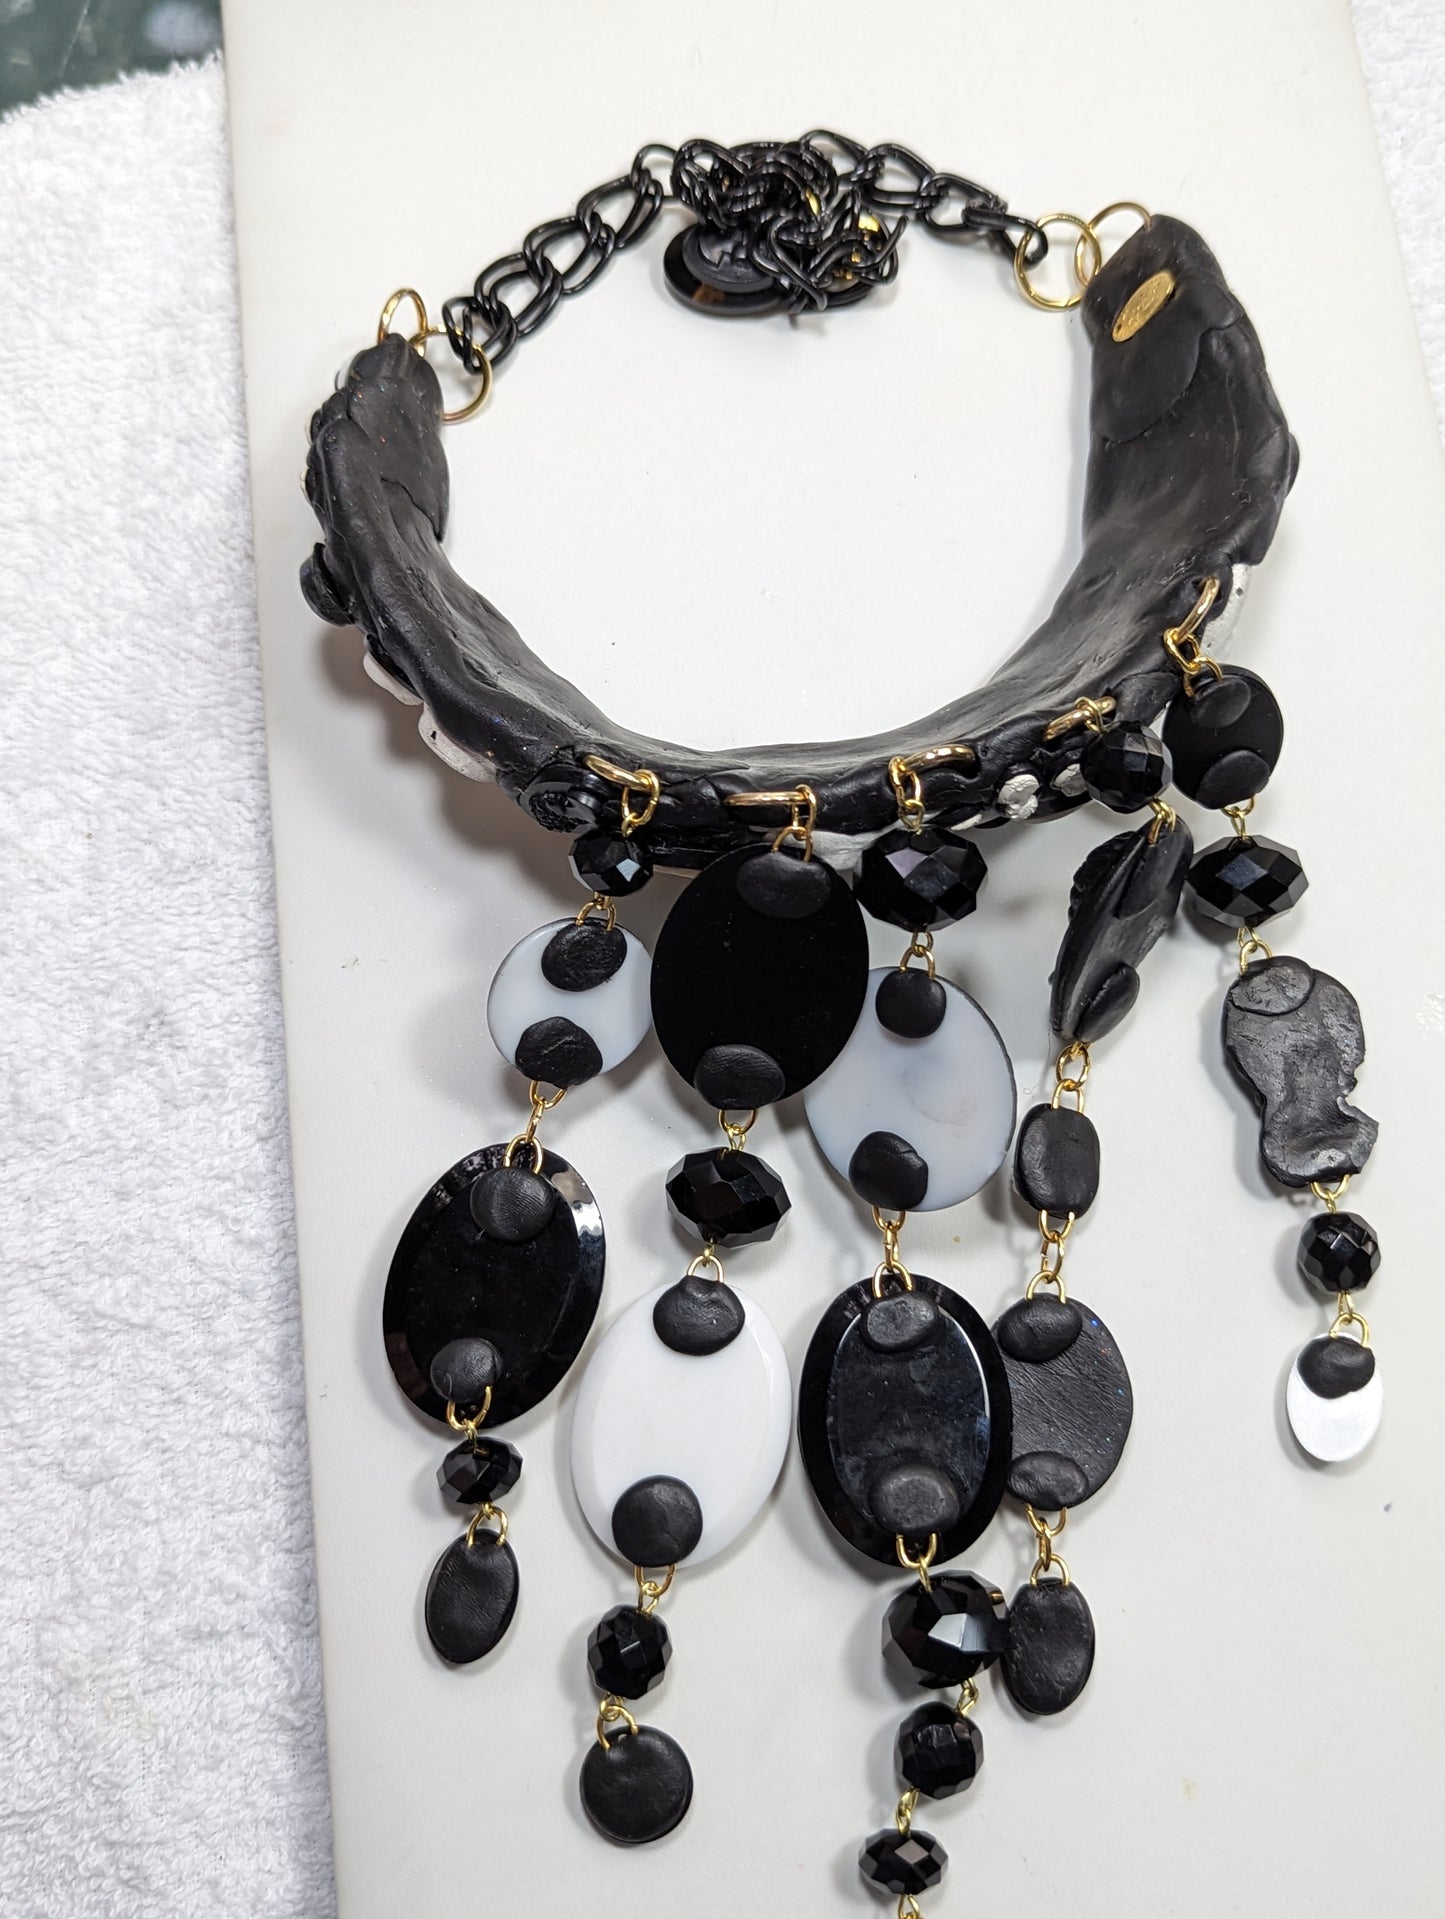 Vintage Black and White Cameo Statement Hand Made Necklace One-of-a-kind Sugar Gay Isber